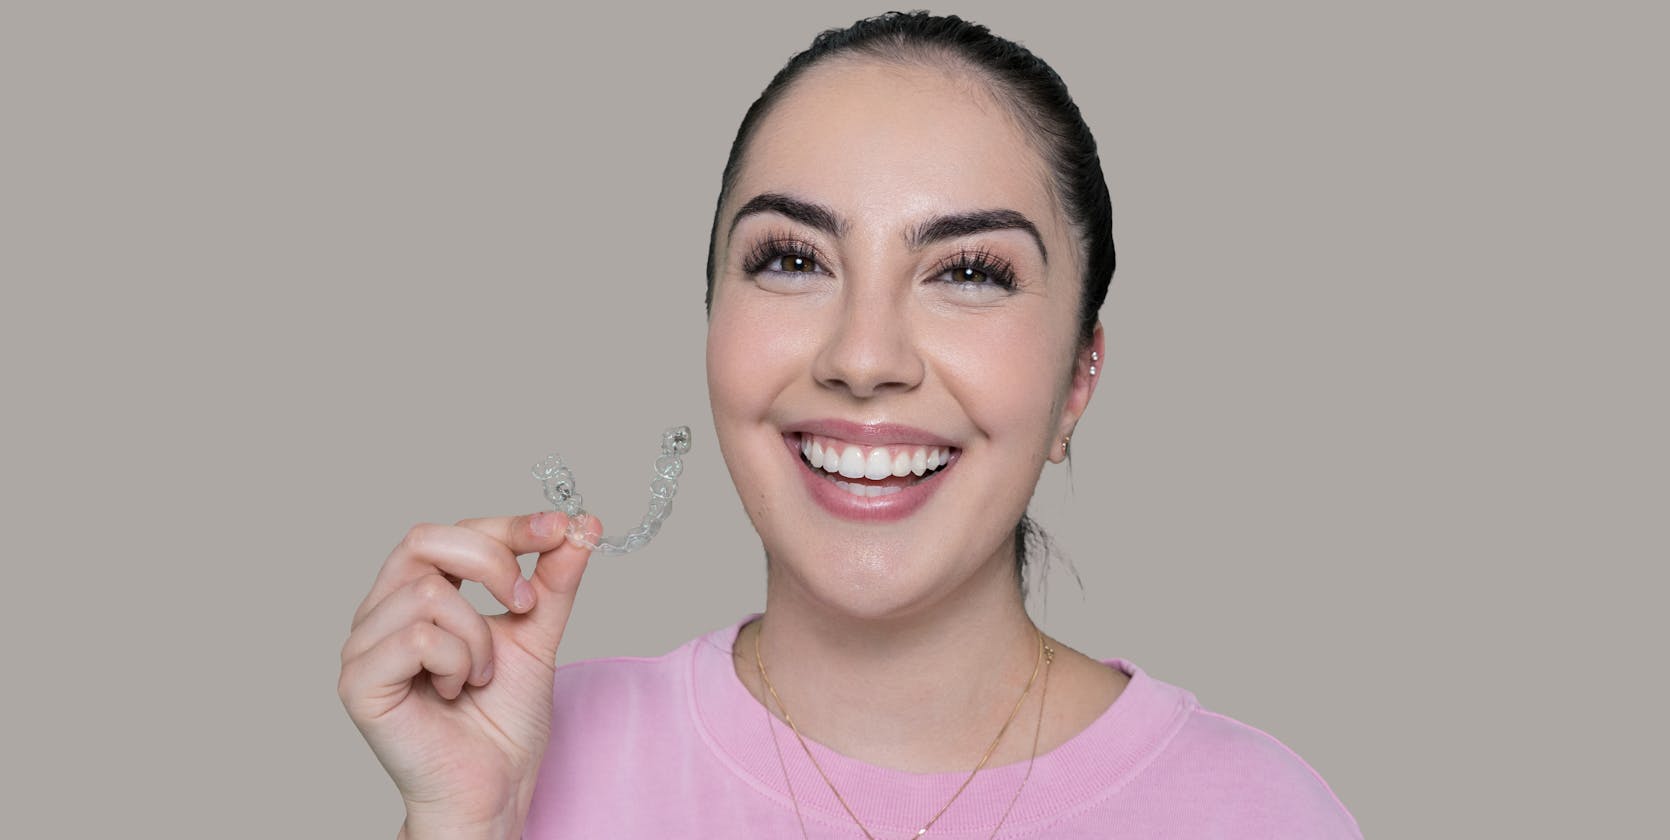 Emily from Vogue Dental Studios with her Invisalign clear aligners